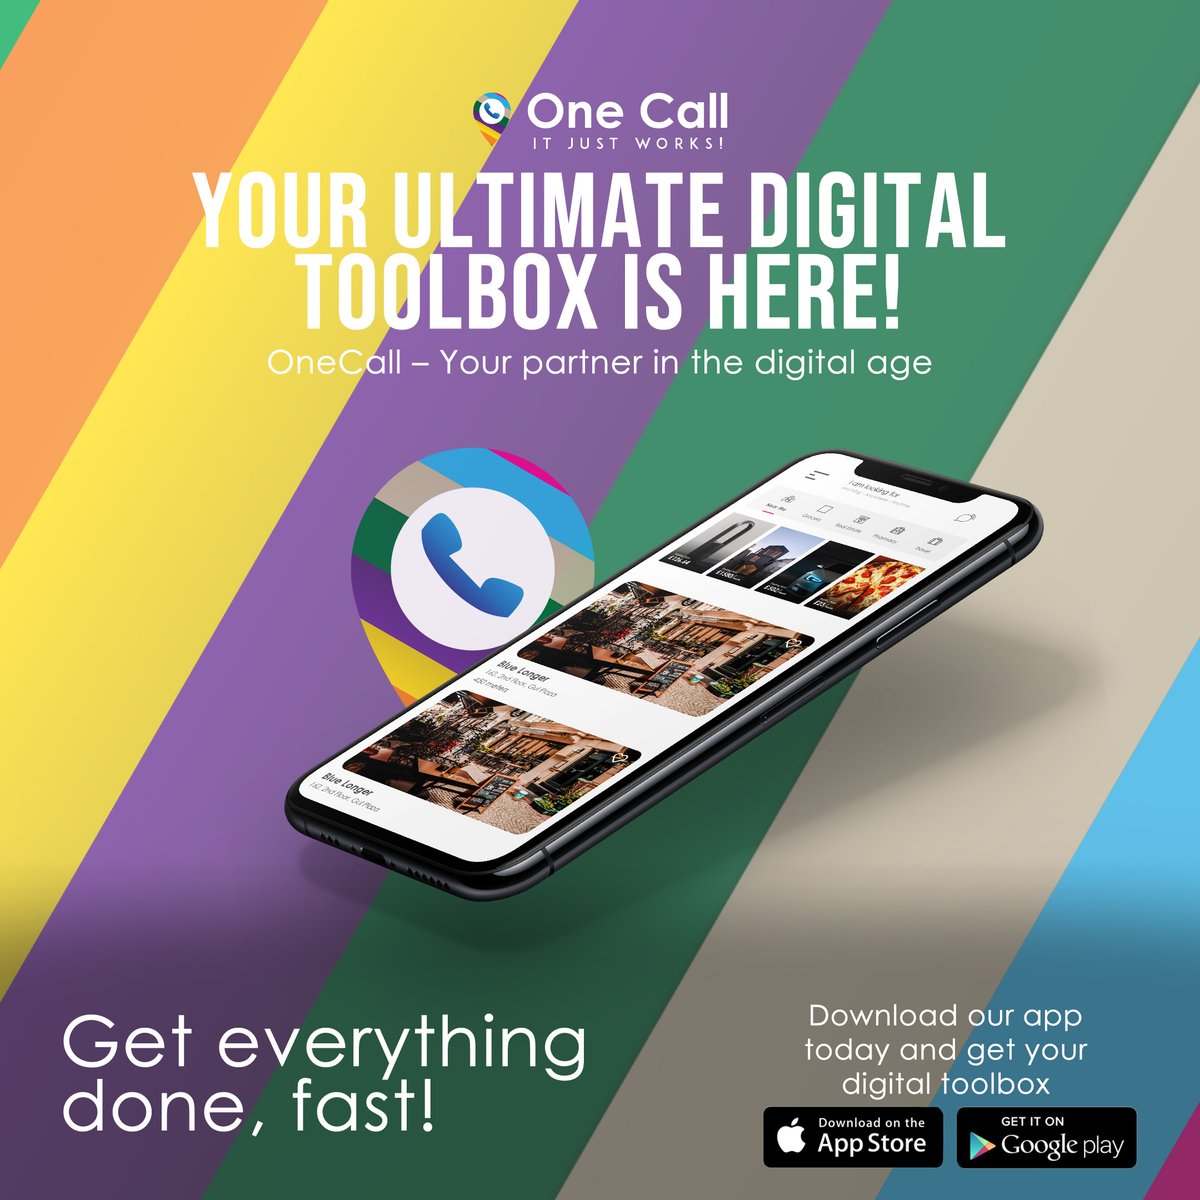 Introducing OneCall: Your essential all-in-one super-app, simplifying your digital life and connecting you with local businesses effortlessly. Say goodbye to app-hopping and hello to convenience!
.
.
#onecall #superapp #digitaltoolbox #onlinetasks #digitalexperience